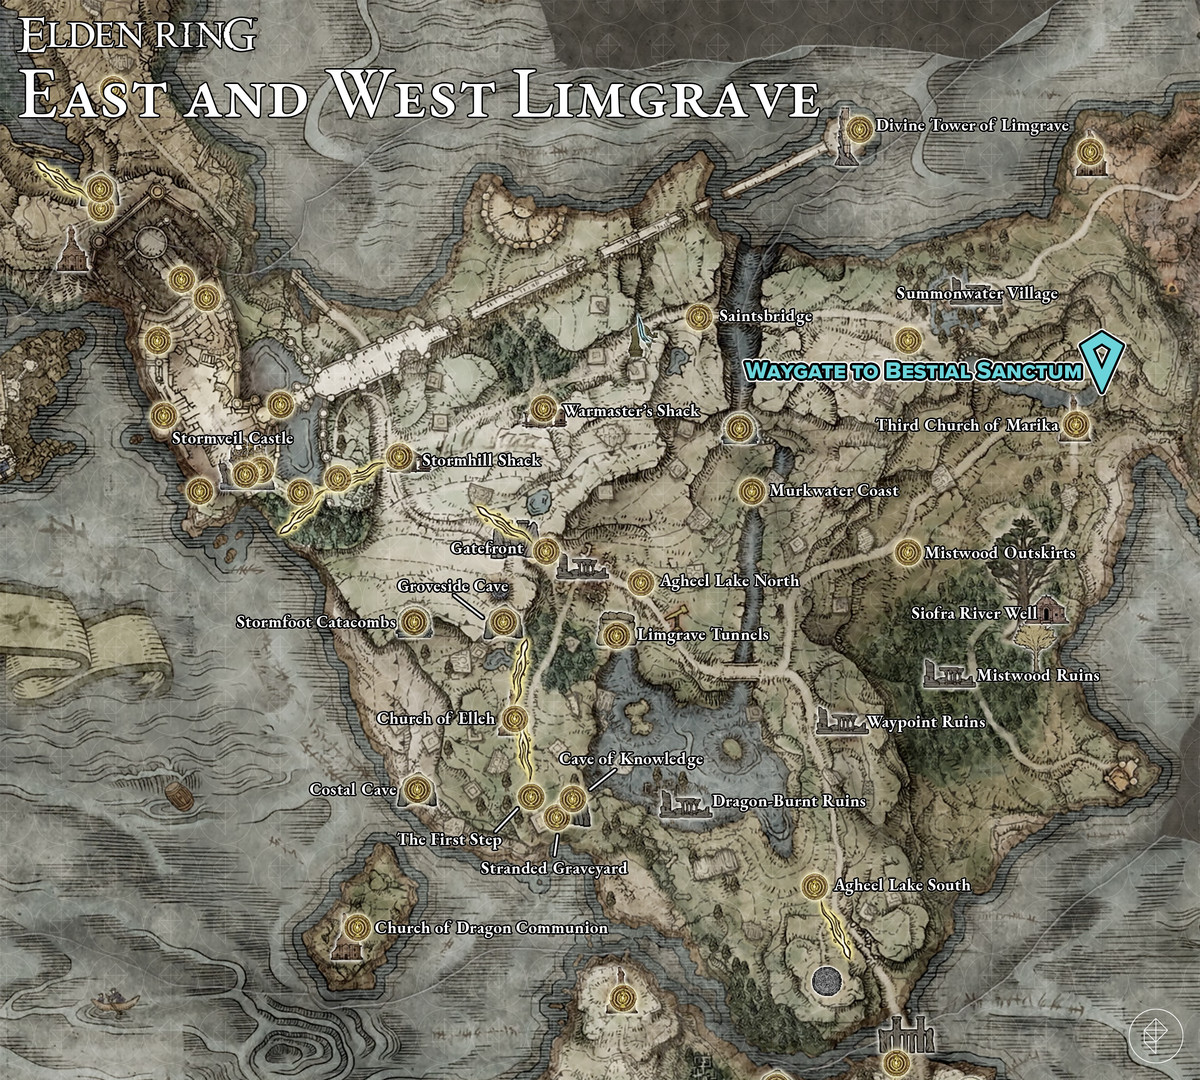 Elden Ring map of Limgrave with a pin marking the location of the Bestial Sanctum waygate.